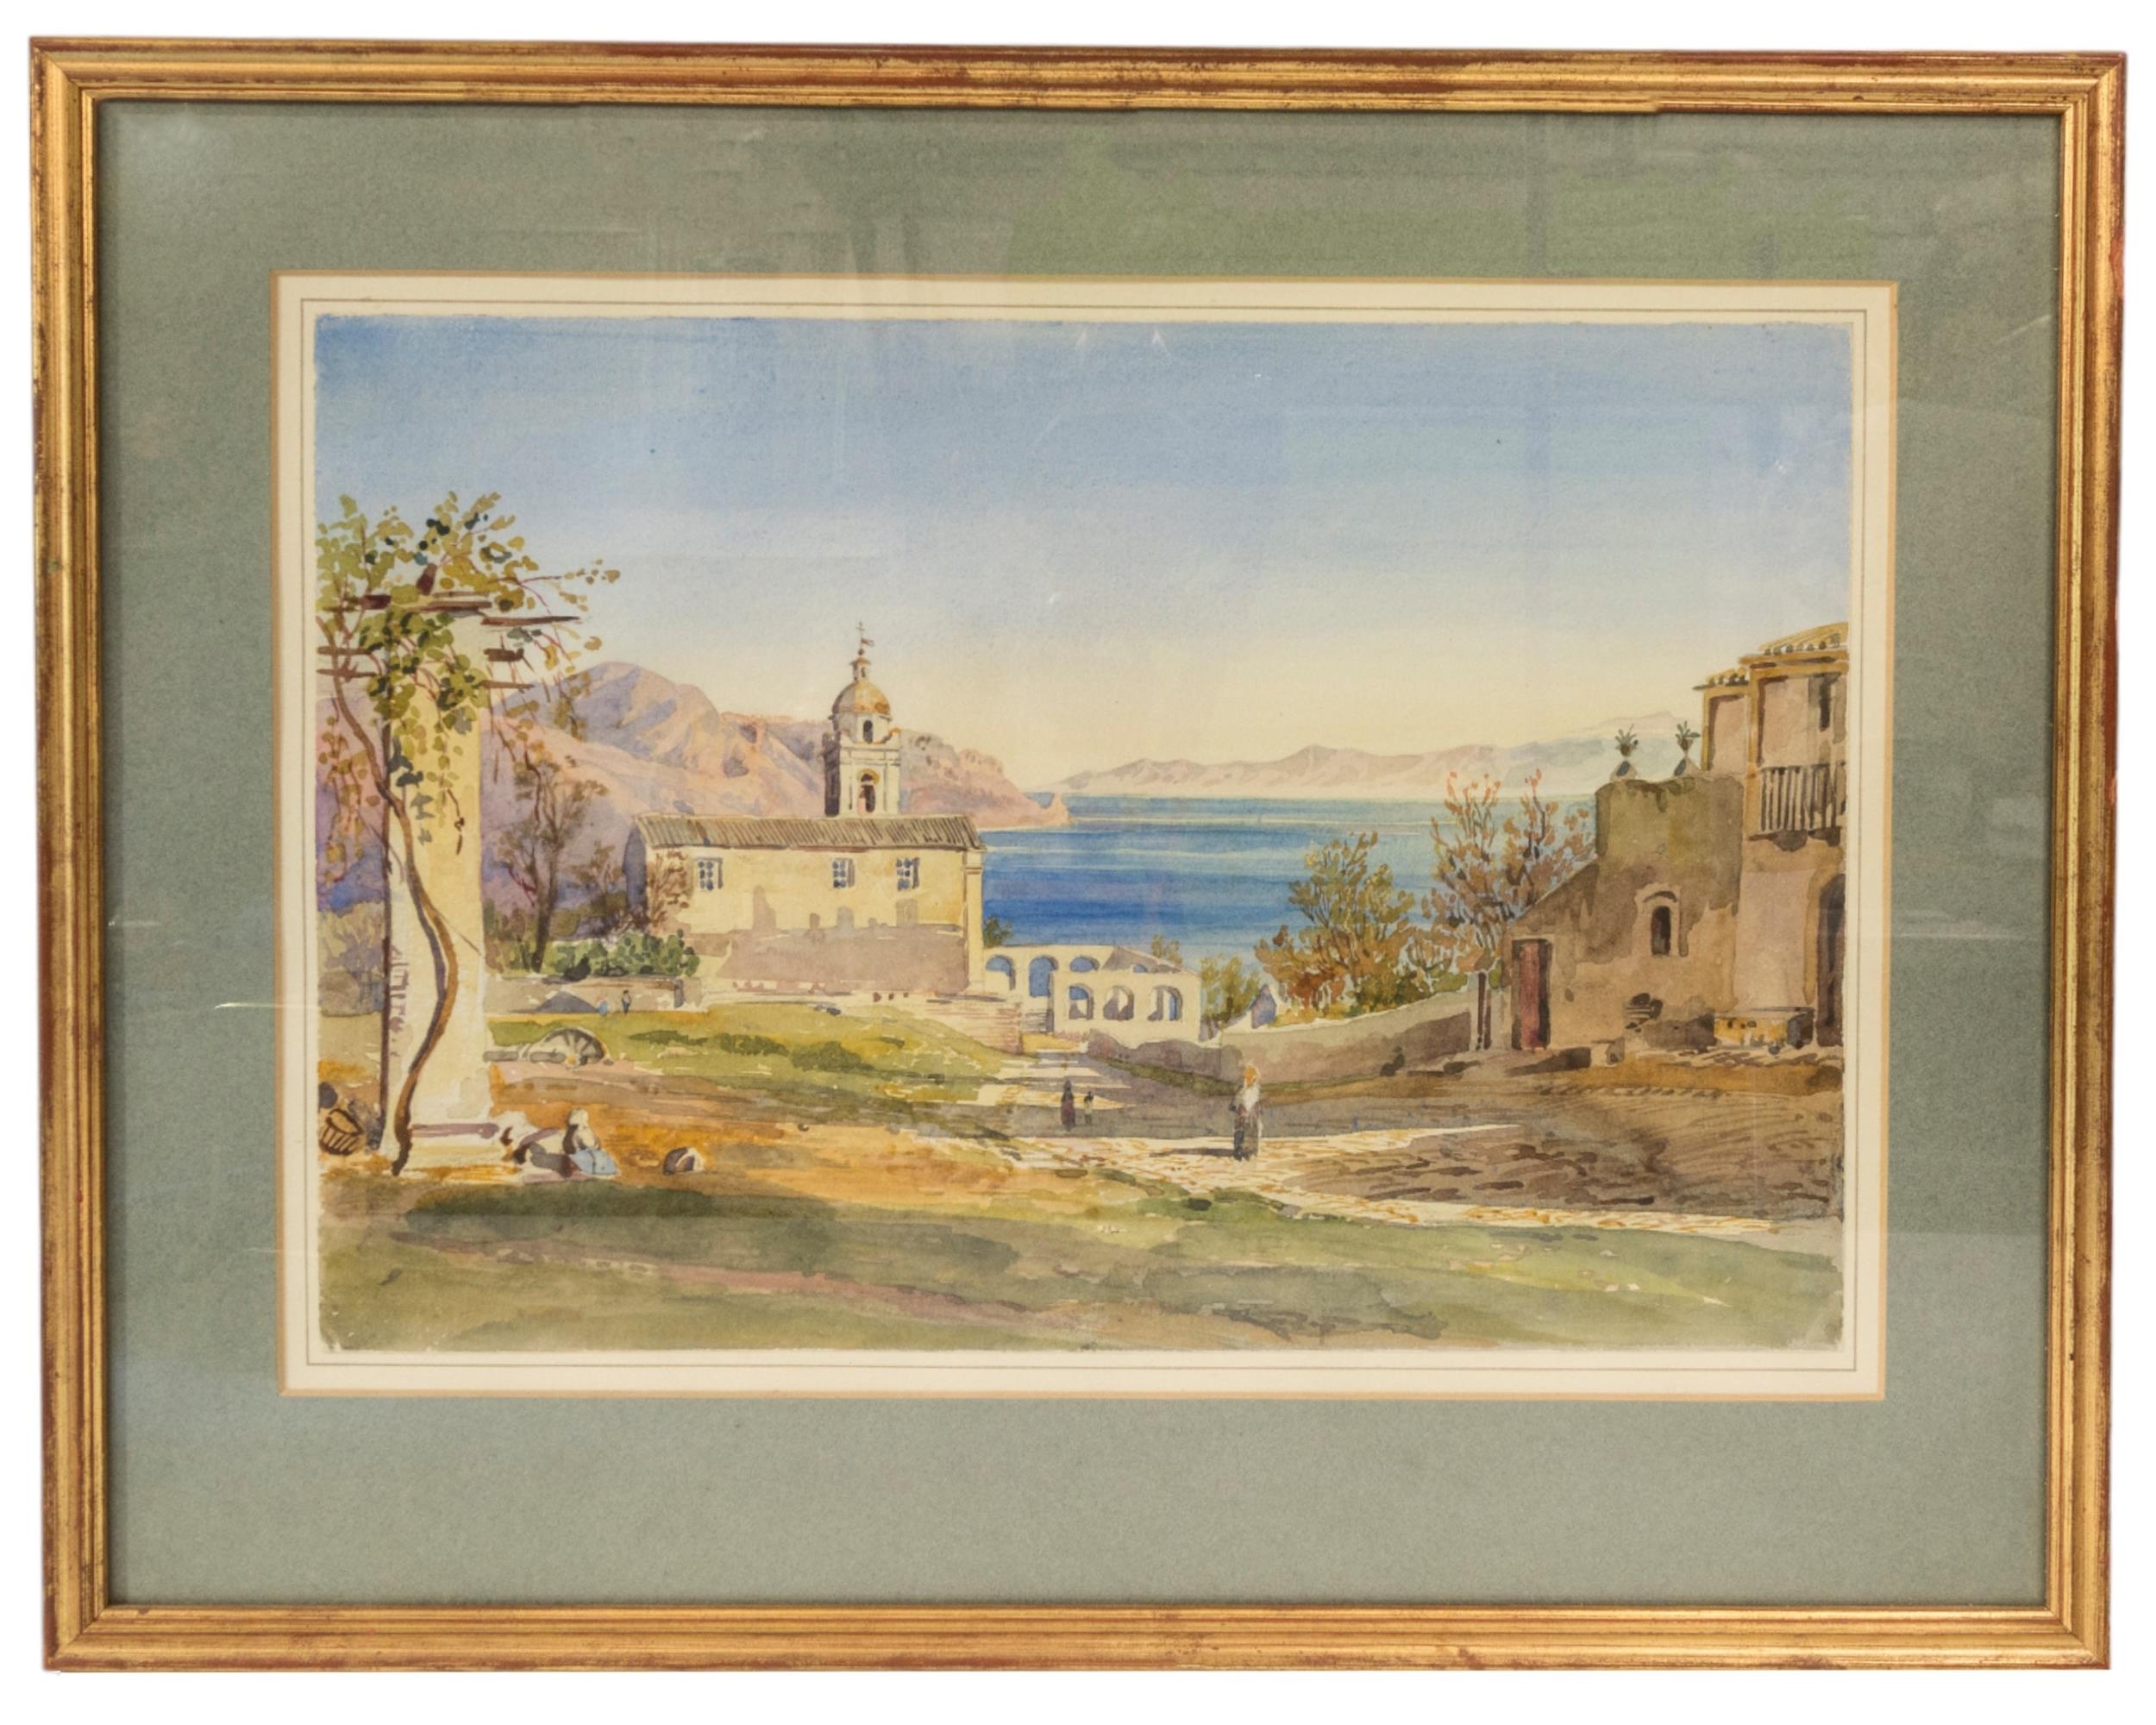 AUGUSTUS JOHN CUTHBERT HARE (1834-1903) 'AT TAORMINA' (1879) WATERCOLOUR/PAPER, glazed and framed,